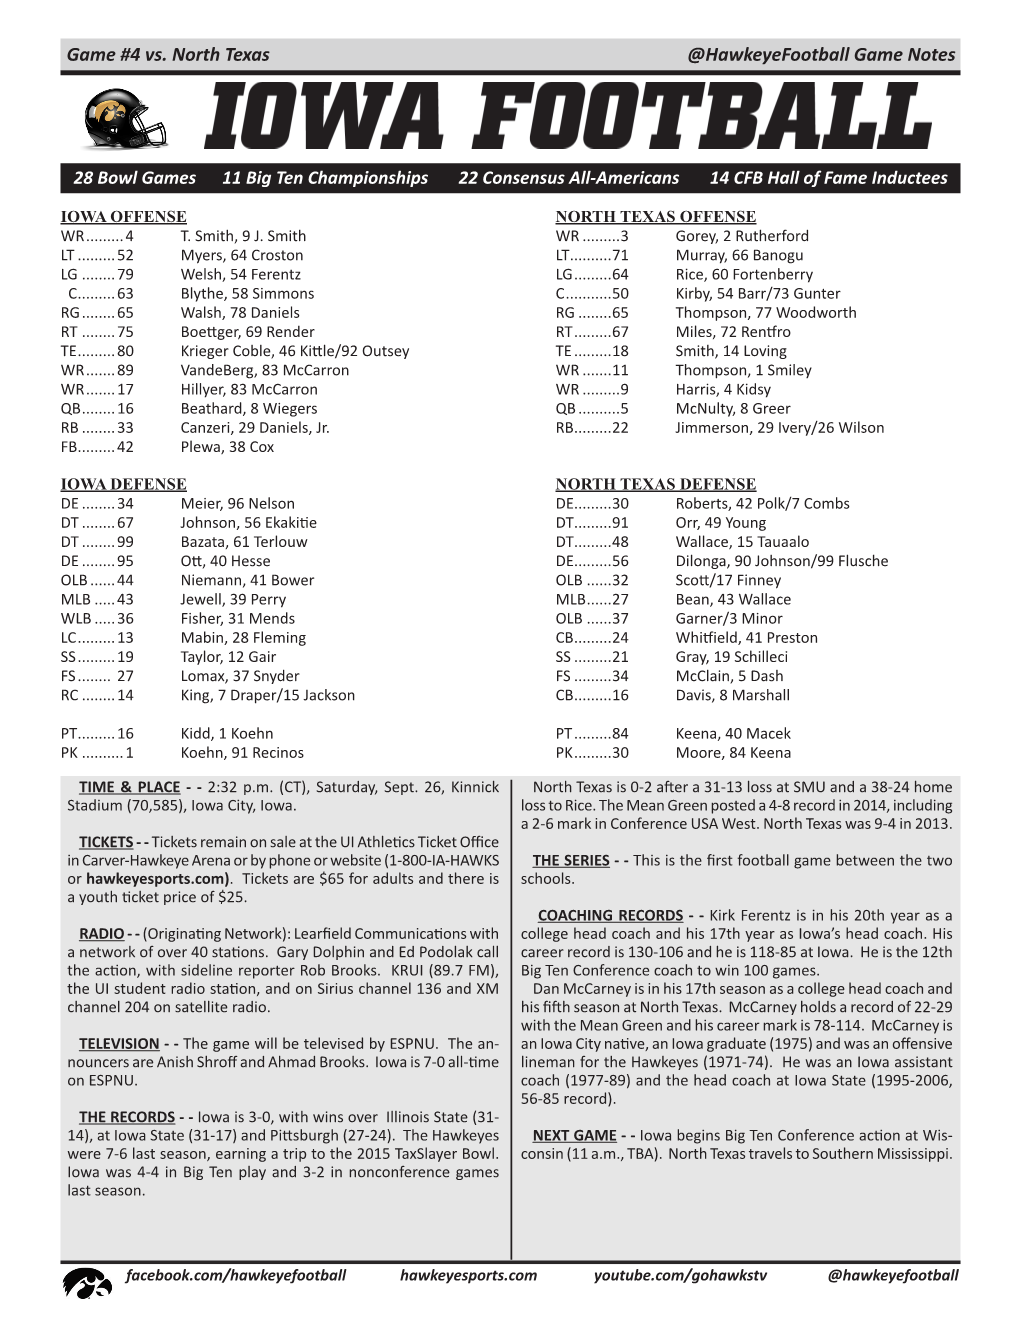 @Hawkeyefootball Game Notes Game #4 Vs. North Texas